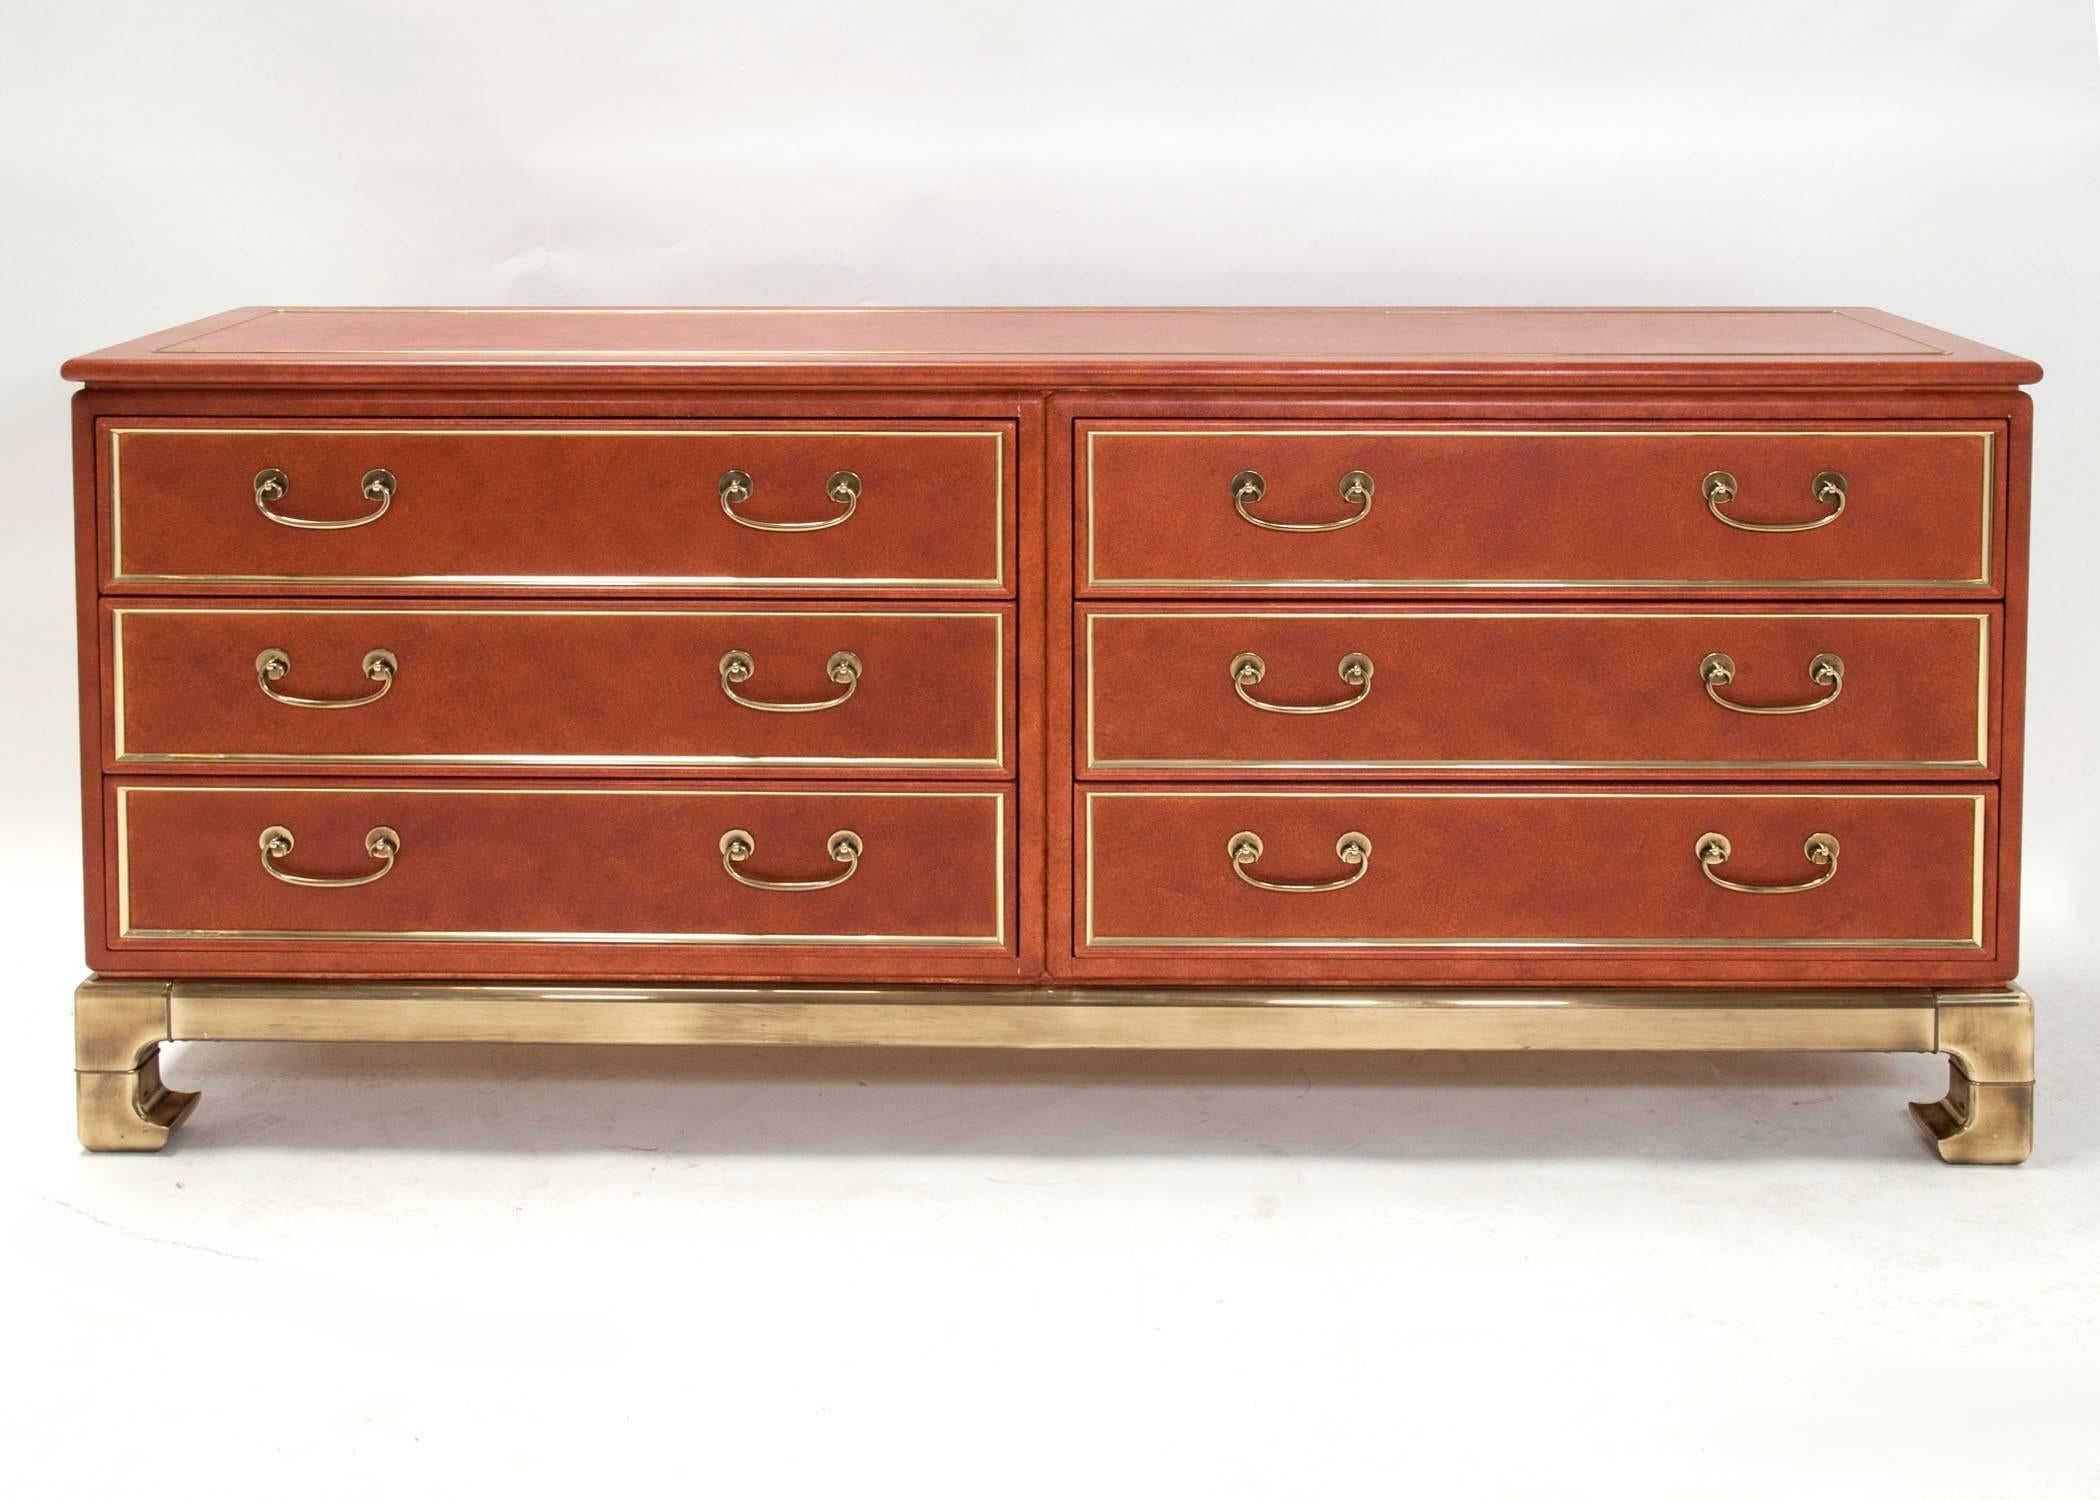 A rare six-drawer dresser attributed to Mastercraft. Faux leather paint finish, with brass detailing, inlay and handles, on a well sculpted Asian influenced base with Hollywood Regency style.